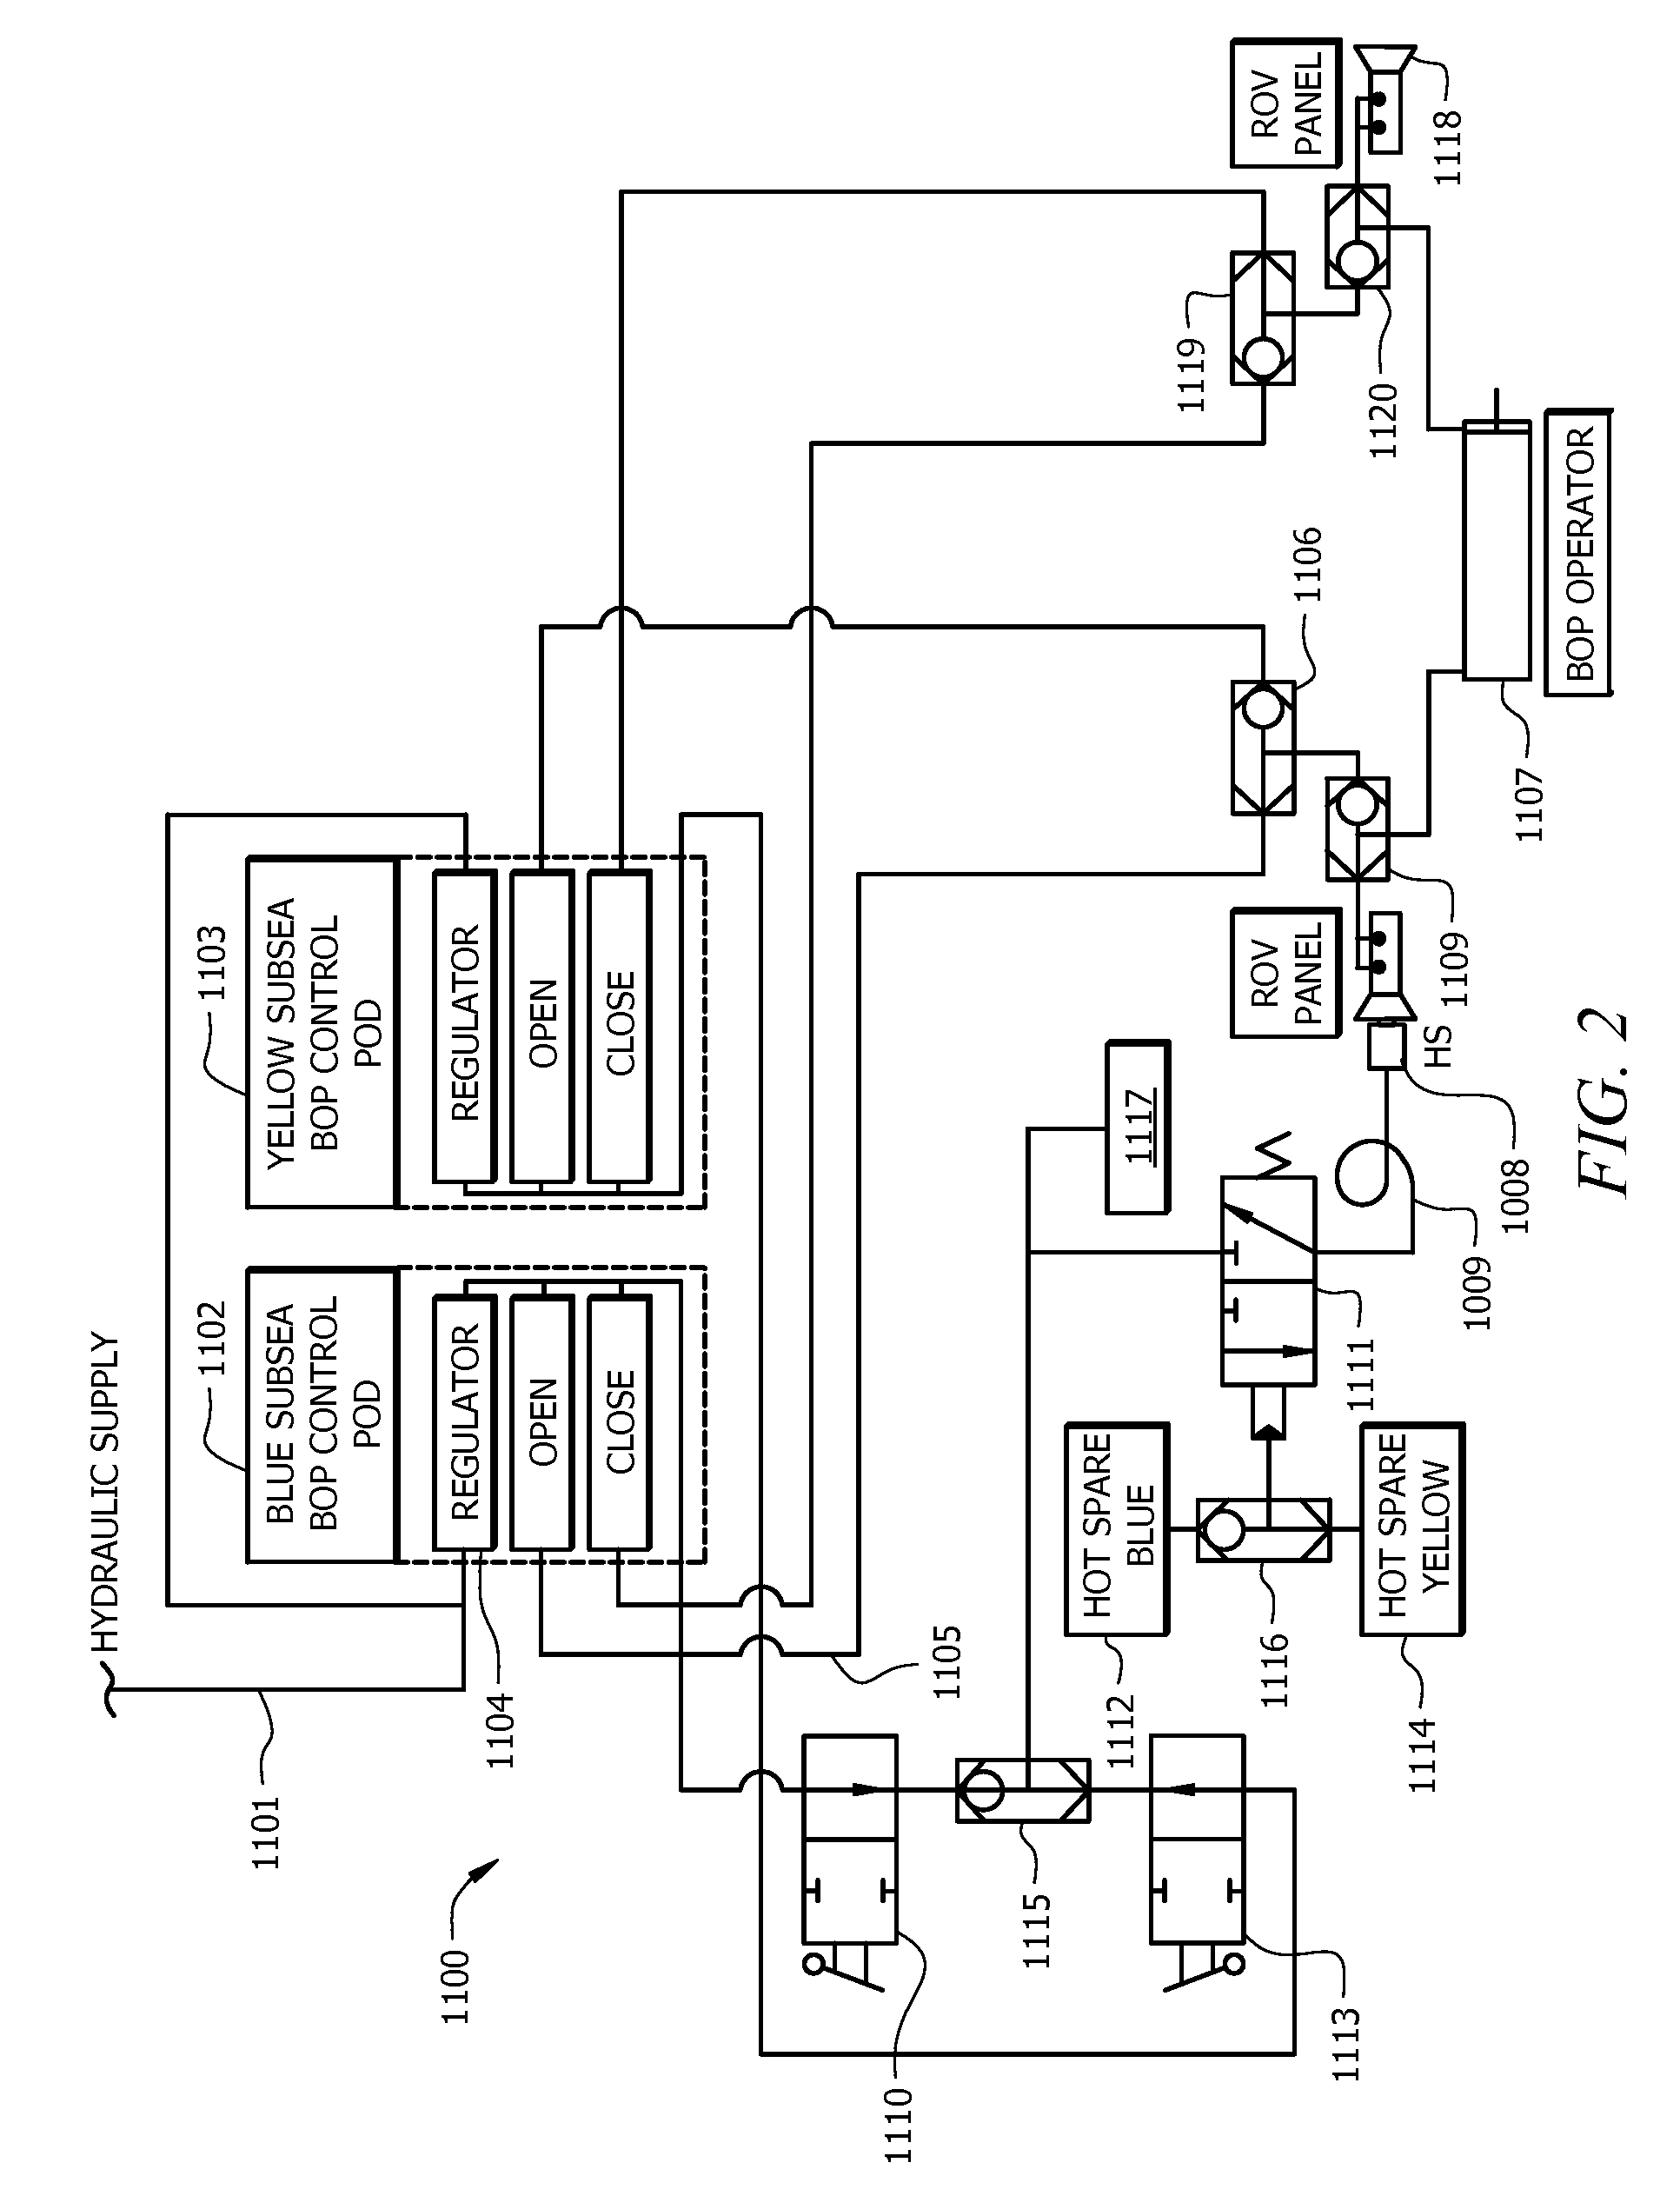 System and method for providing additional blowout preventer control redundancy